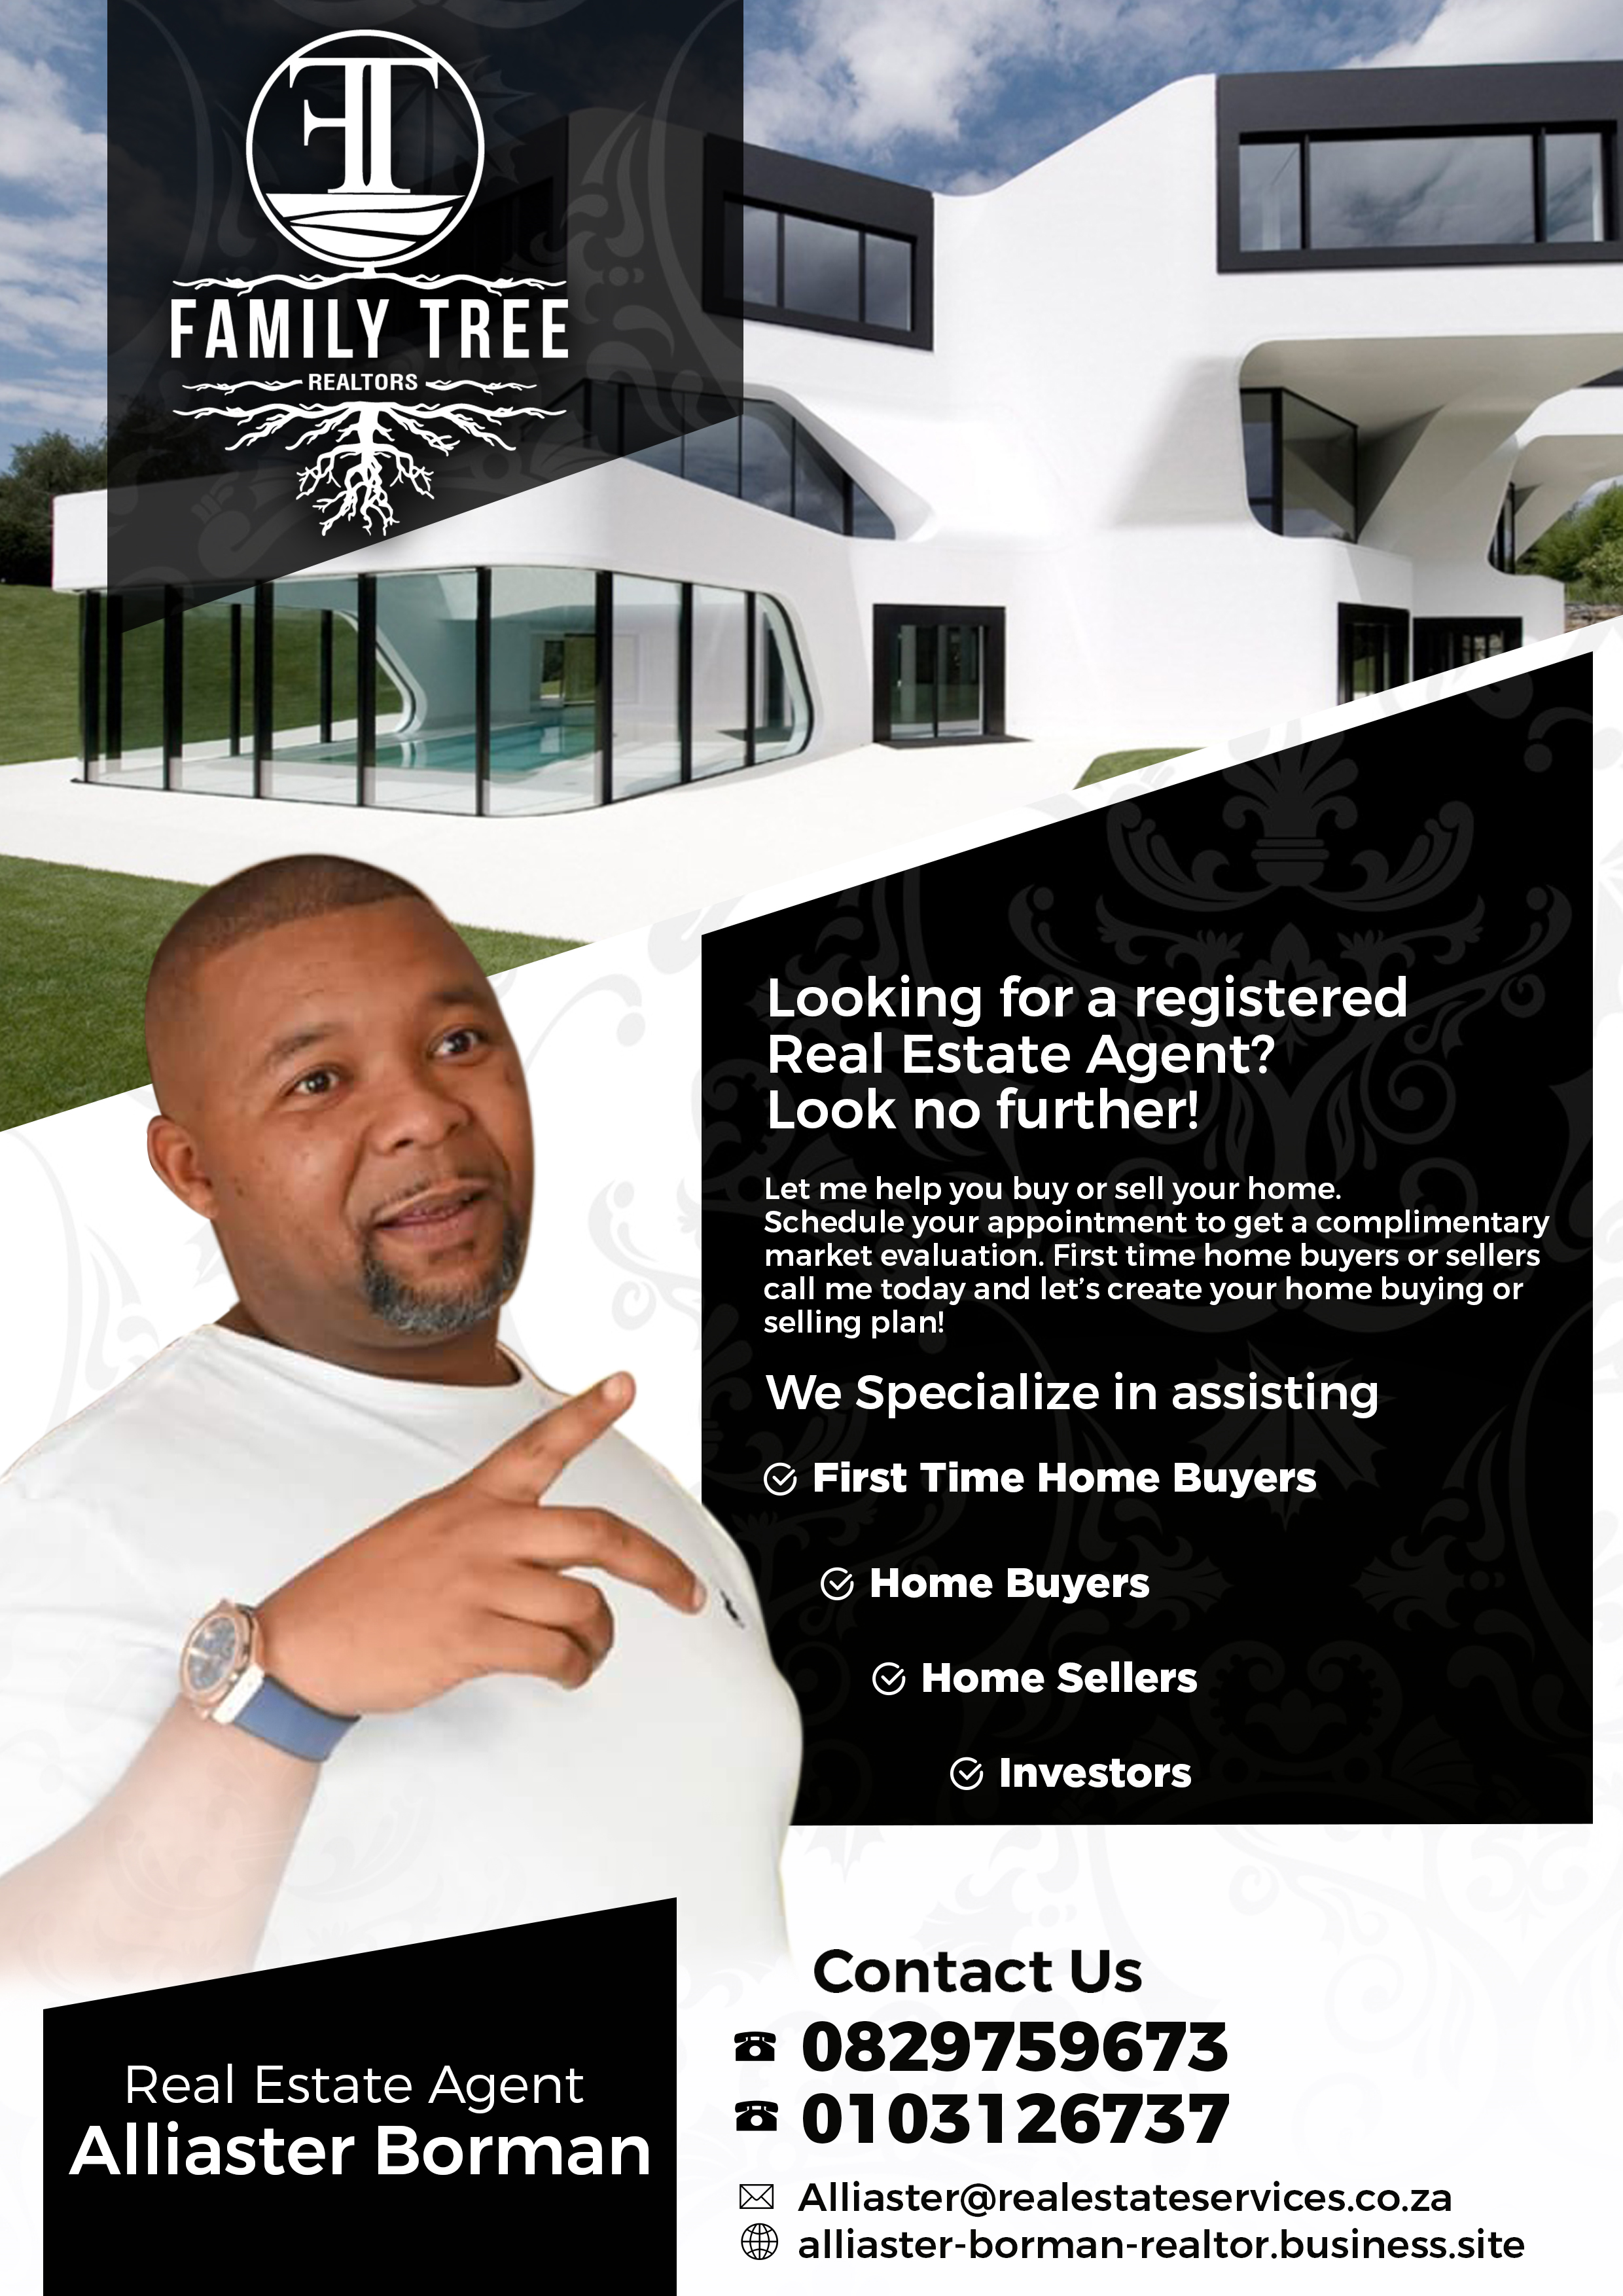 Your Real Estate agent in Gauteng